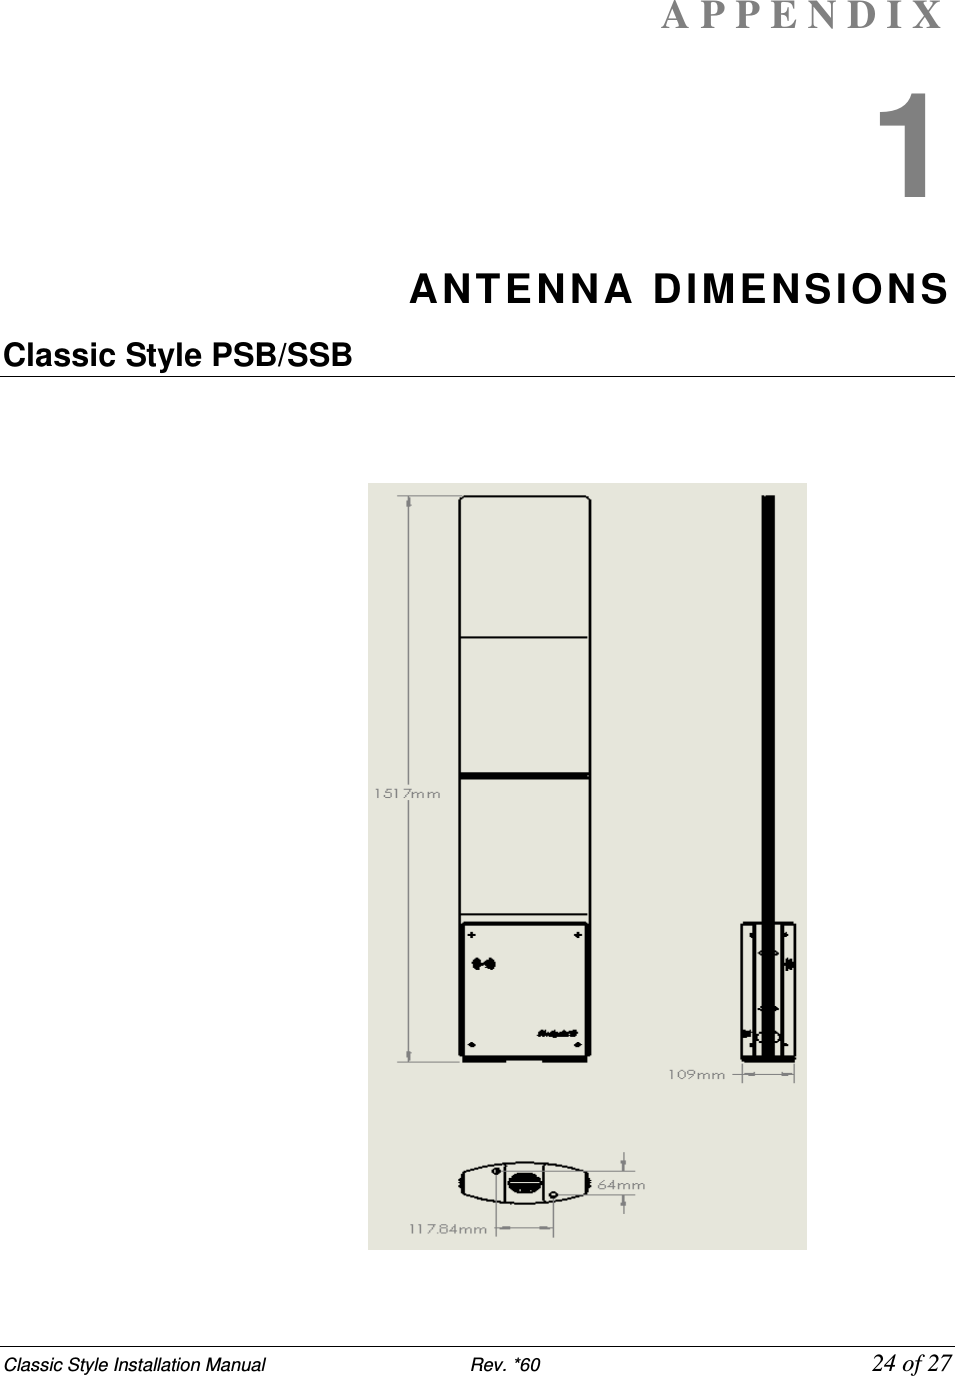 Classic Style Installation Manual                           Rev. *60           24 of 27 A P P E N D I X  1 ANTENNA DIME NSIONS Classic Style PSB/SSB    